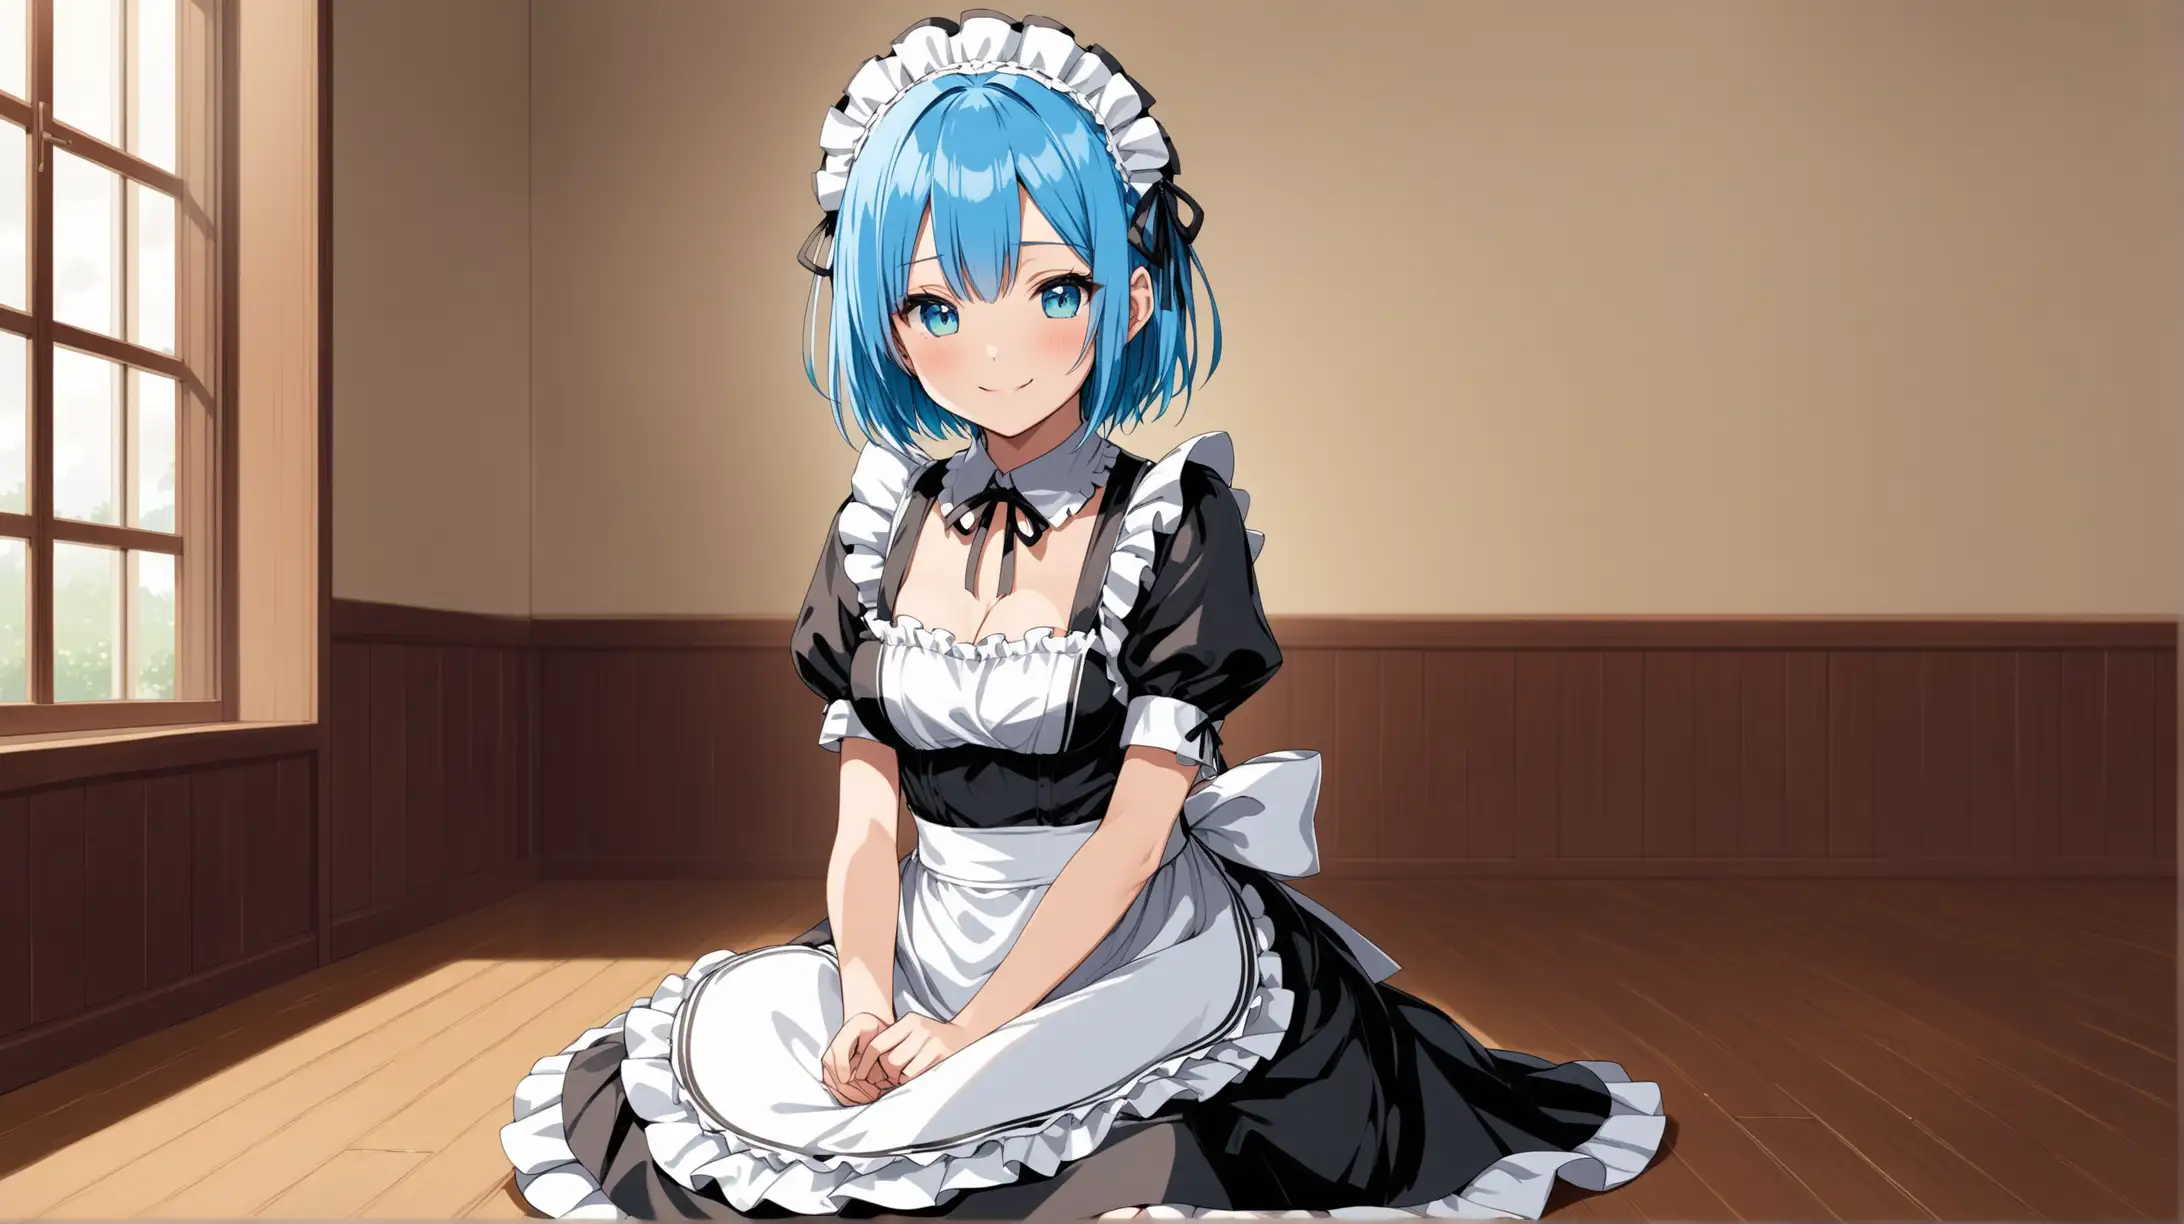 Rem Maid Outfit Sitting Indoors on Overcast Day